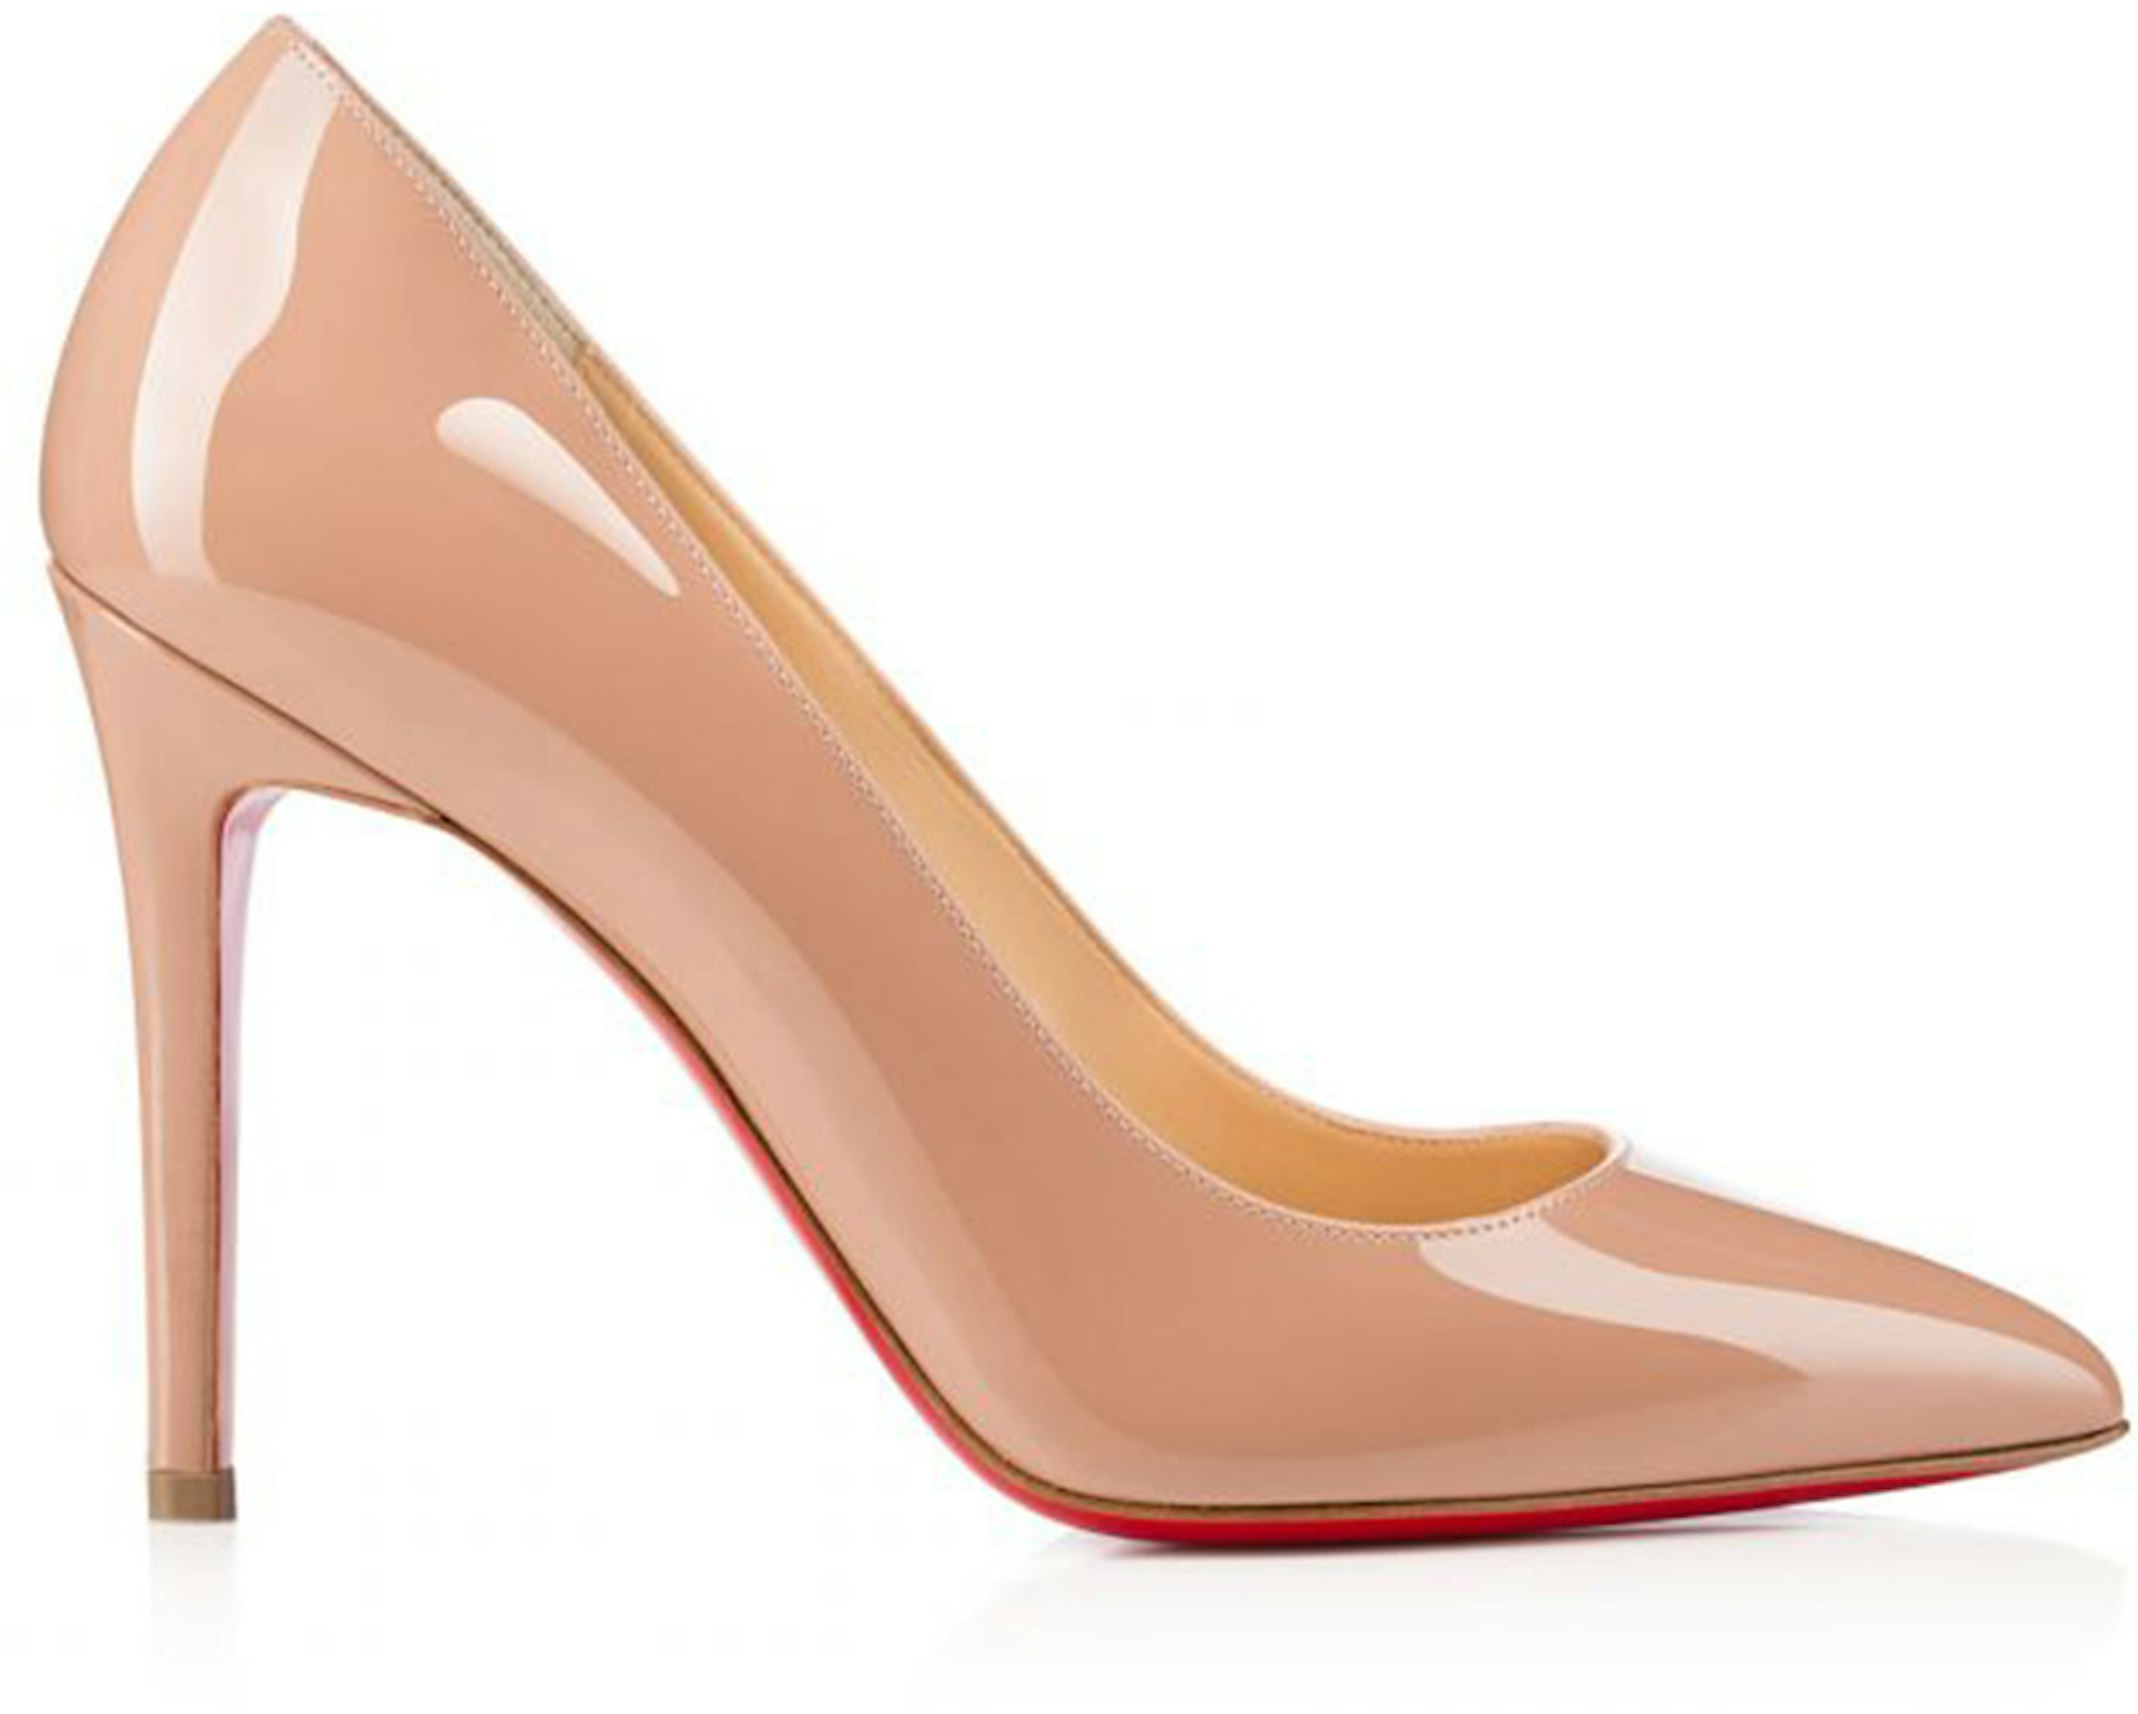 Christian Louboutin Pigalle 100mm Nude Patent Leather - 3080680PK20 - US